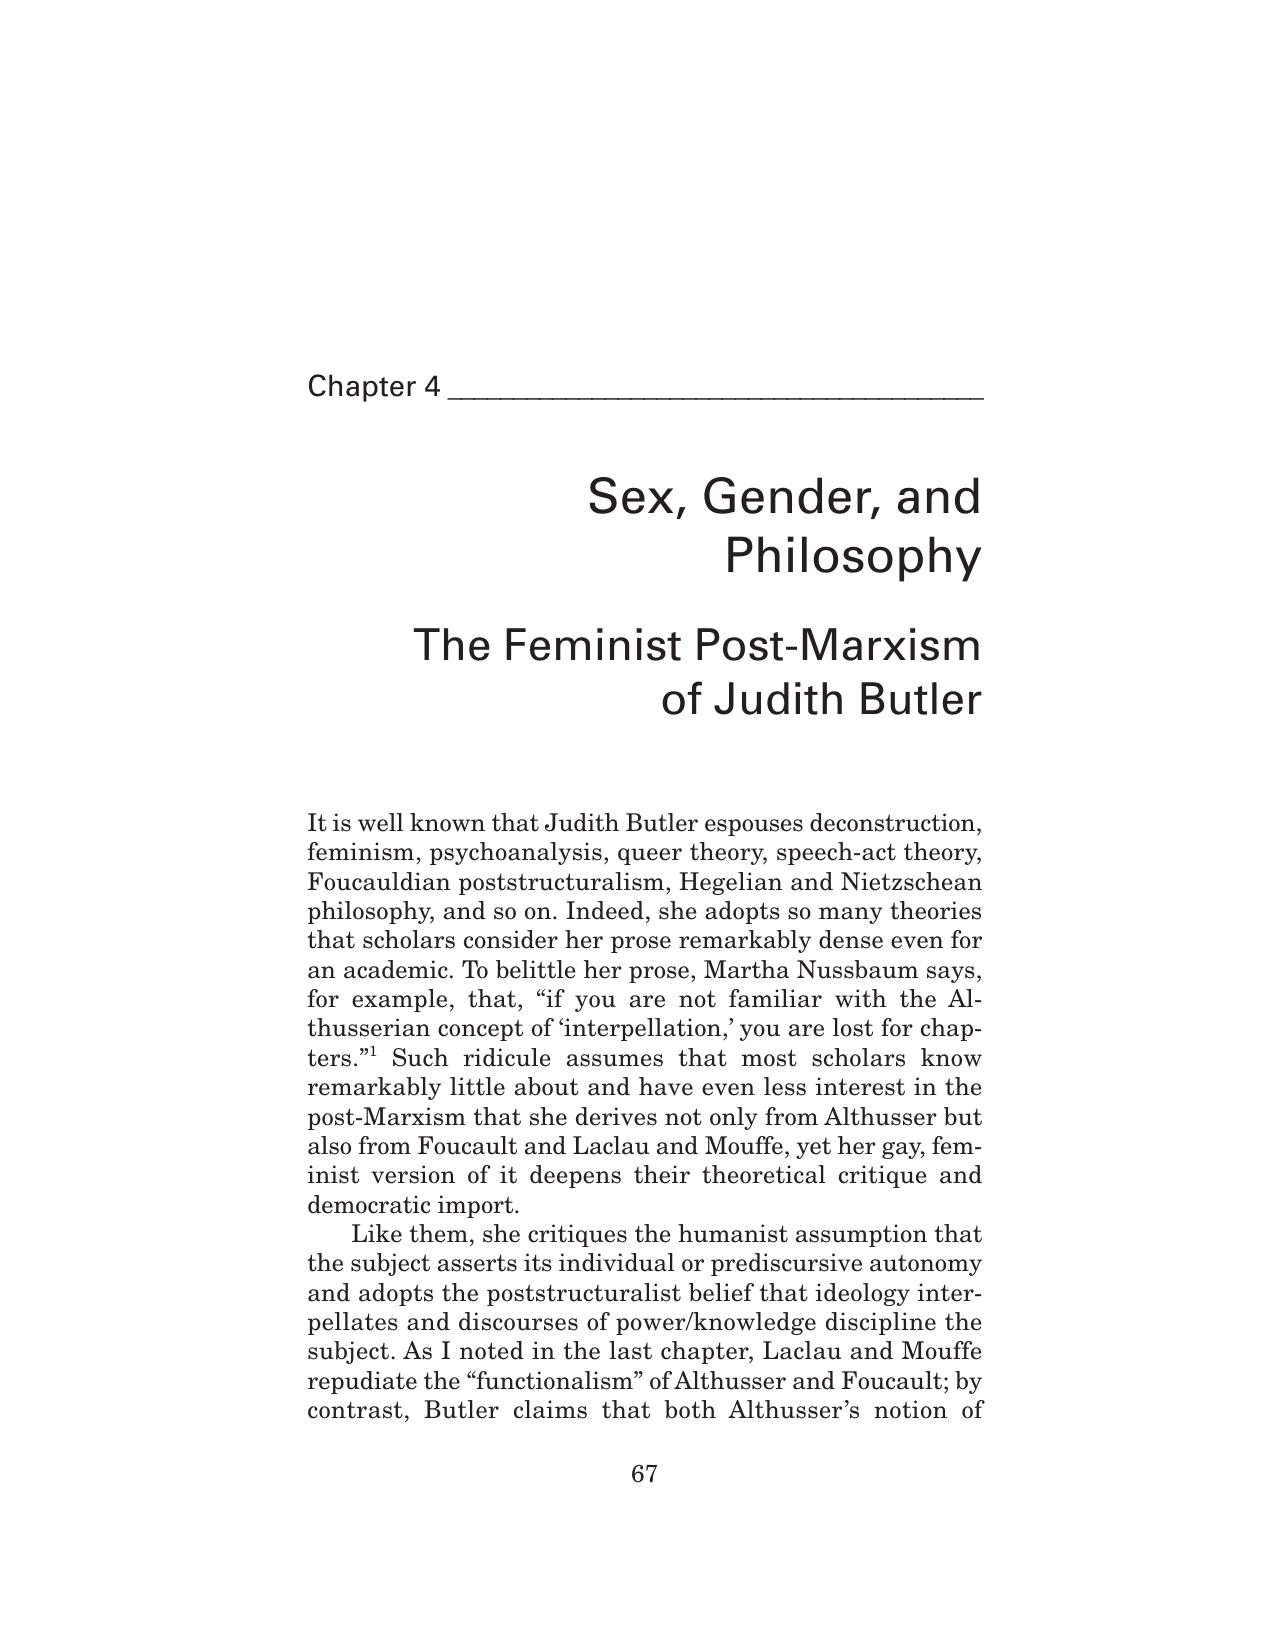 Sex, Gender, and Philosophy The Feminist Post-Marxism of Judith Butler [Chapter]